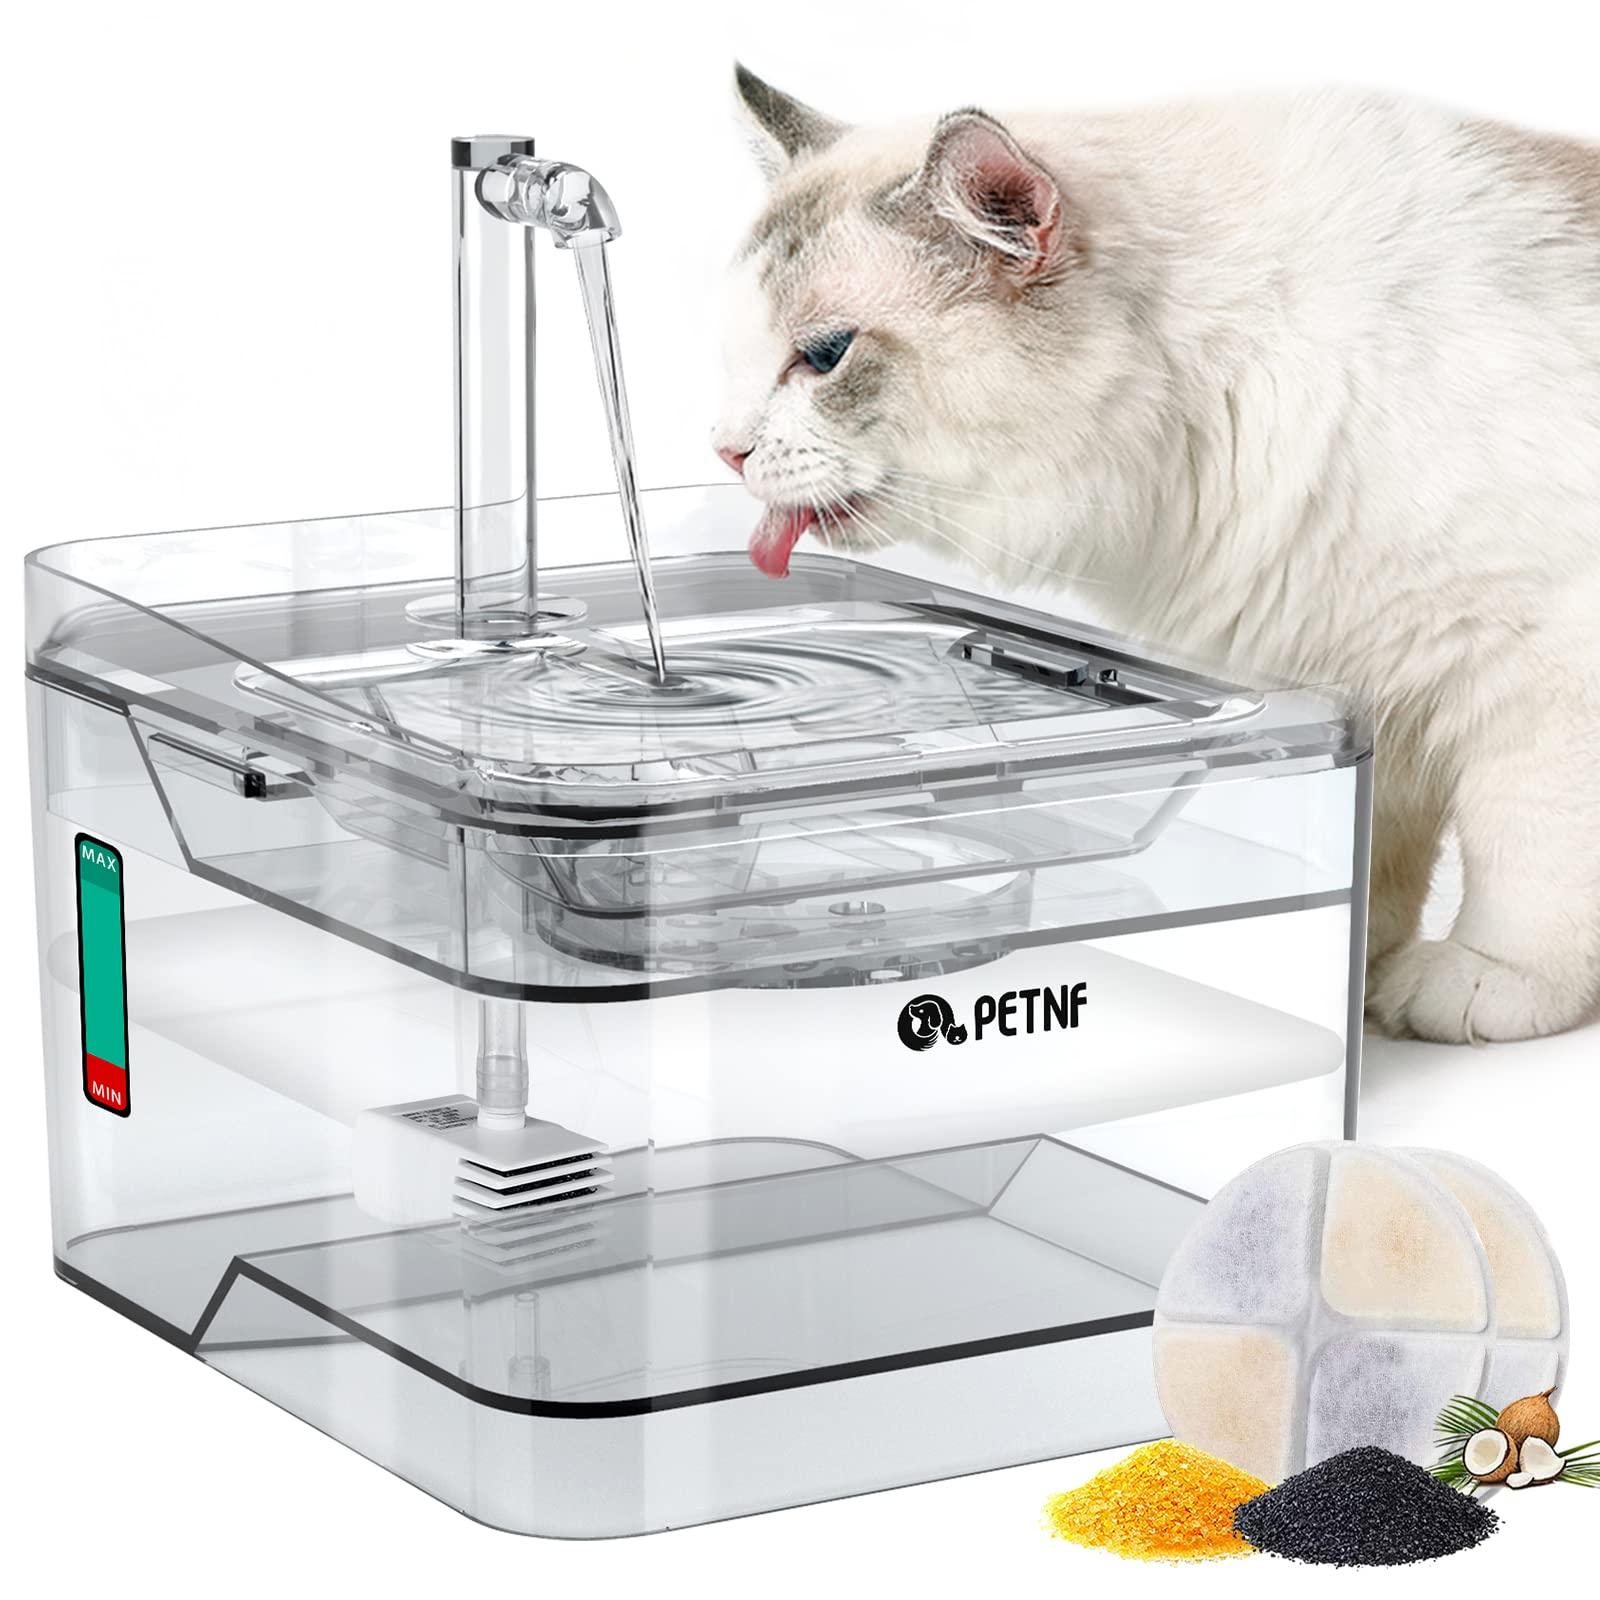 Cat Water Fountain,2021 Upgraded Pet Water Fountain 101oz/3L Dog Cat Water Dispenser, Smart Pump with LED Light,Ultra Quiet Automatic Cat Drinking Fountains with 2 Filters,3 Water Flow Settings